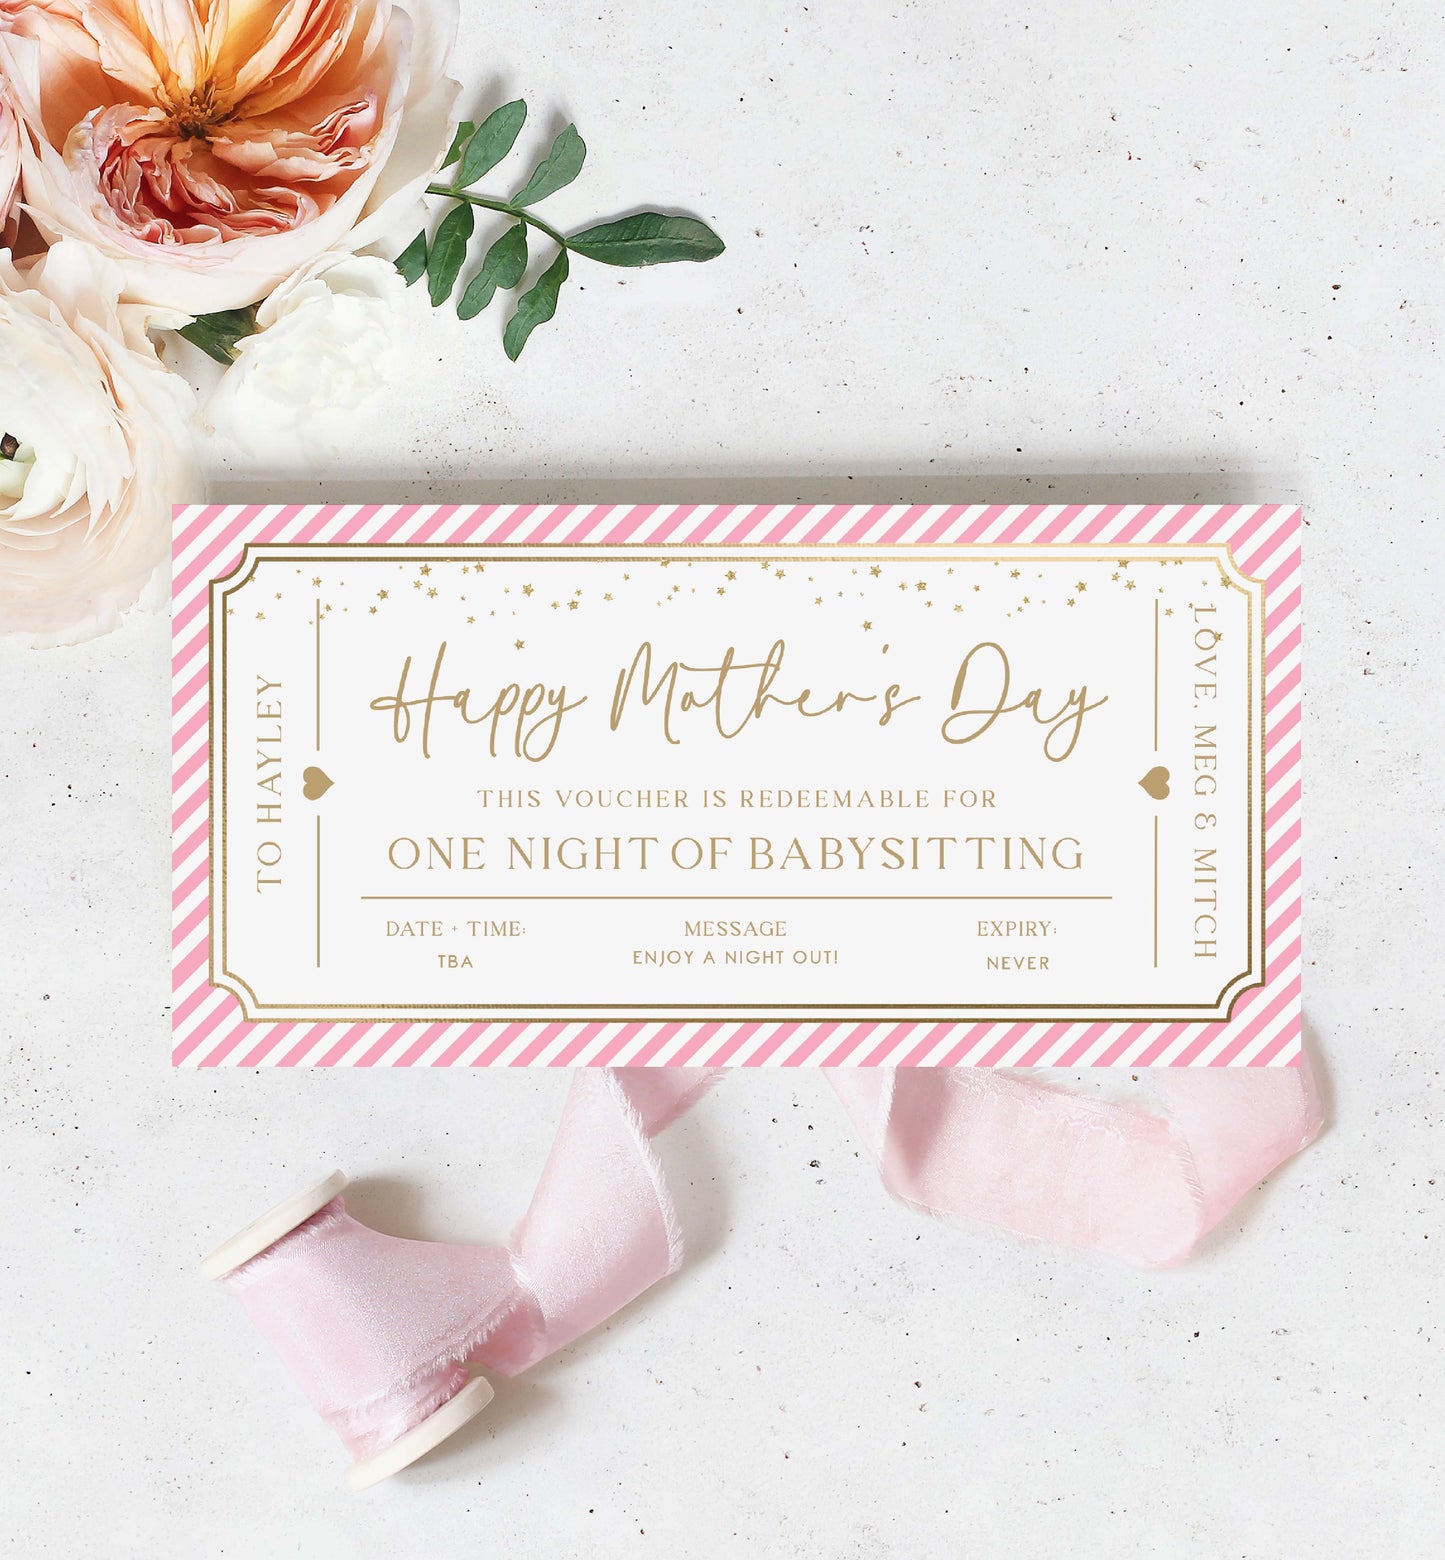 Printable Babysitting Gift Voucher, Mother's Day Childminding Gift Certificate, Childminding Date Night Voucher Coupon Paintly Stripe